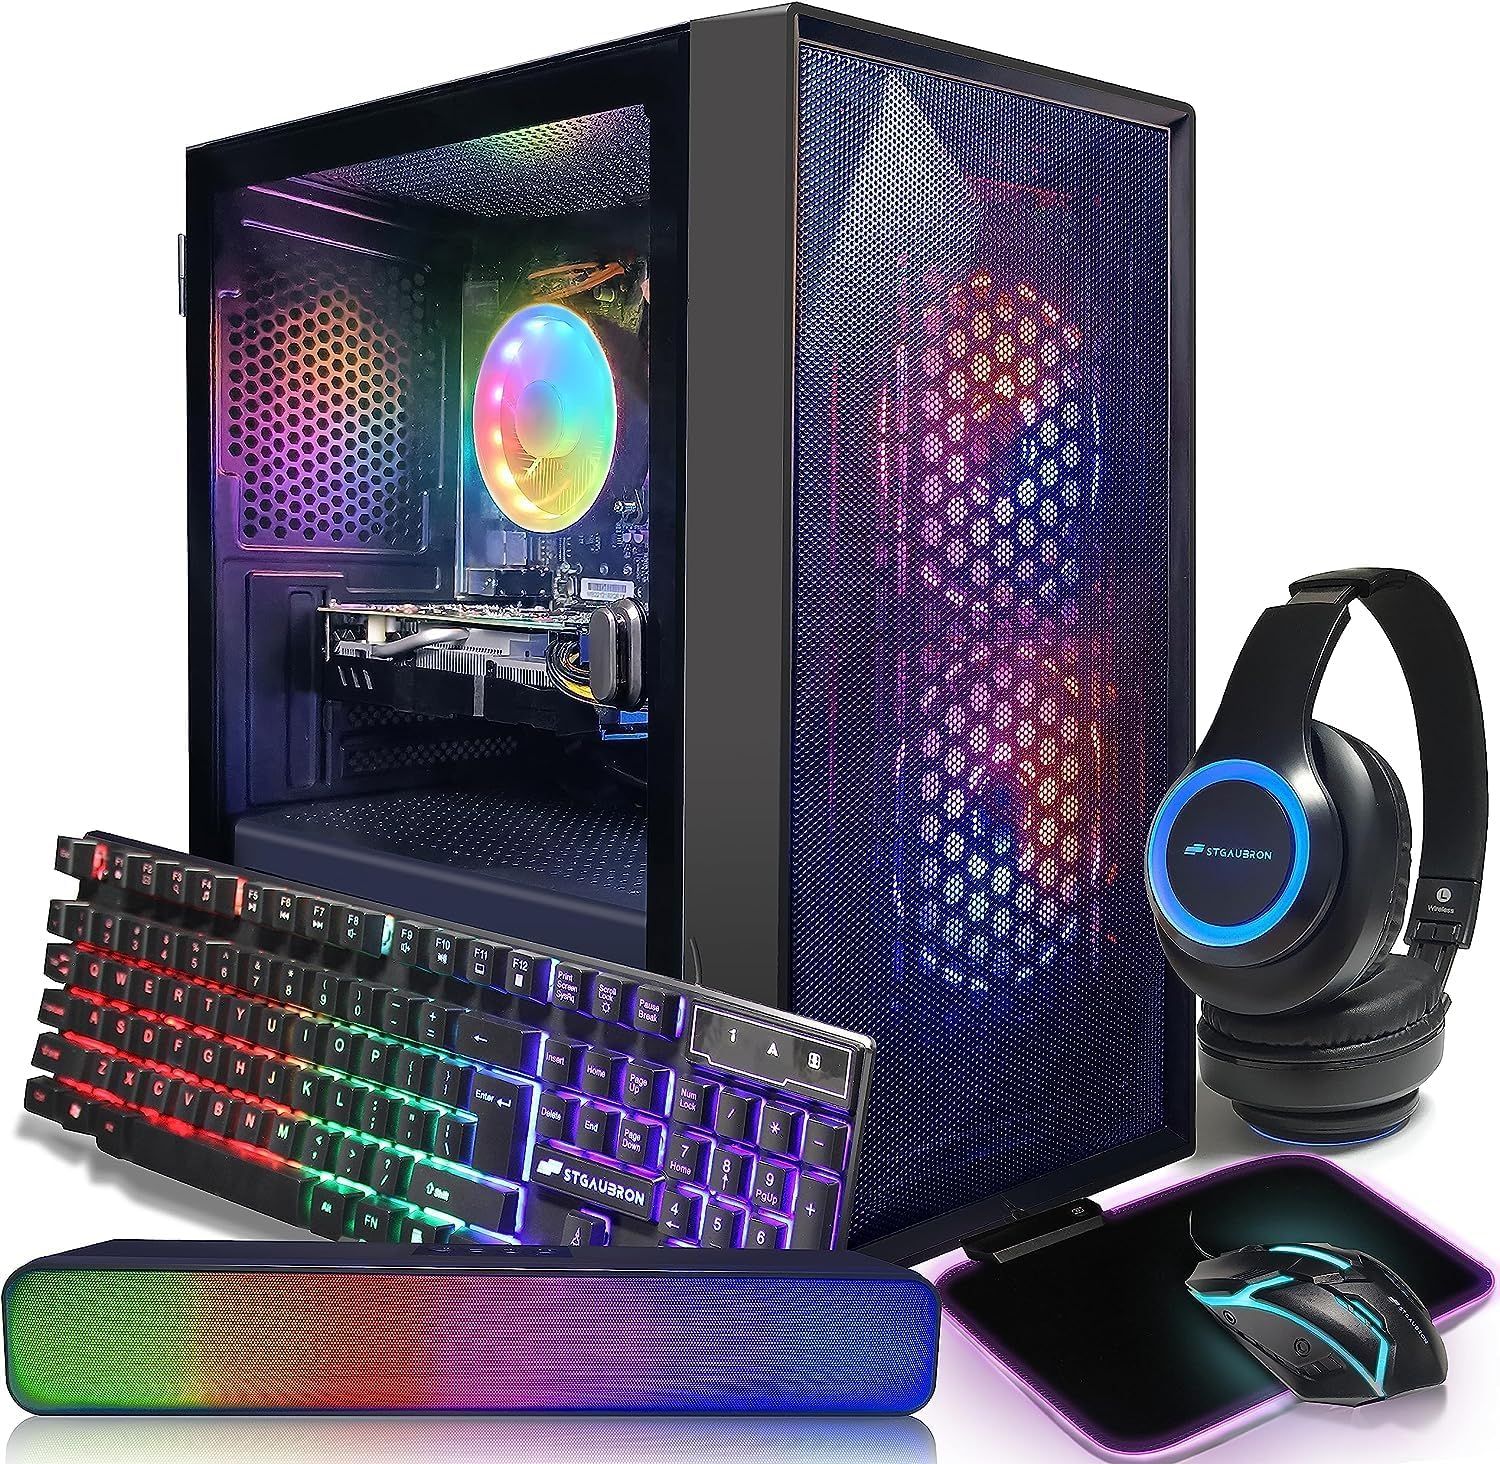 Budget Gaming PCs: Best Budget Gaming PCs: Enjoy Quality Gaming without  Breaking the Bank (2023) - The Economic Times